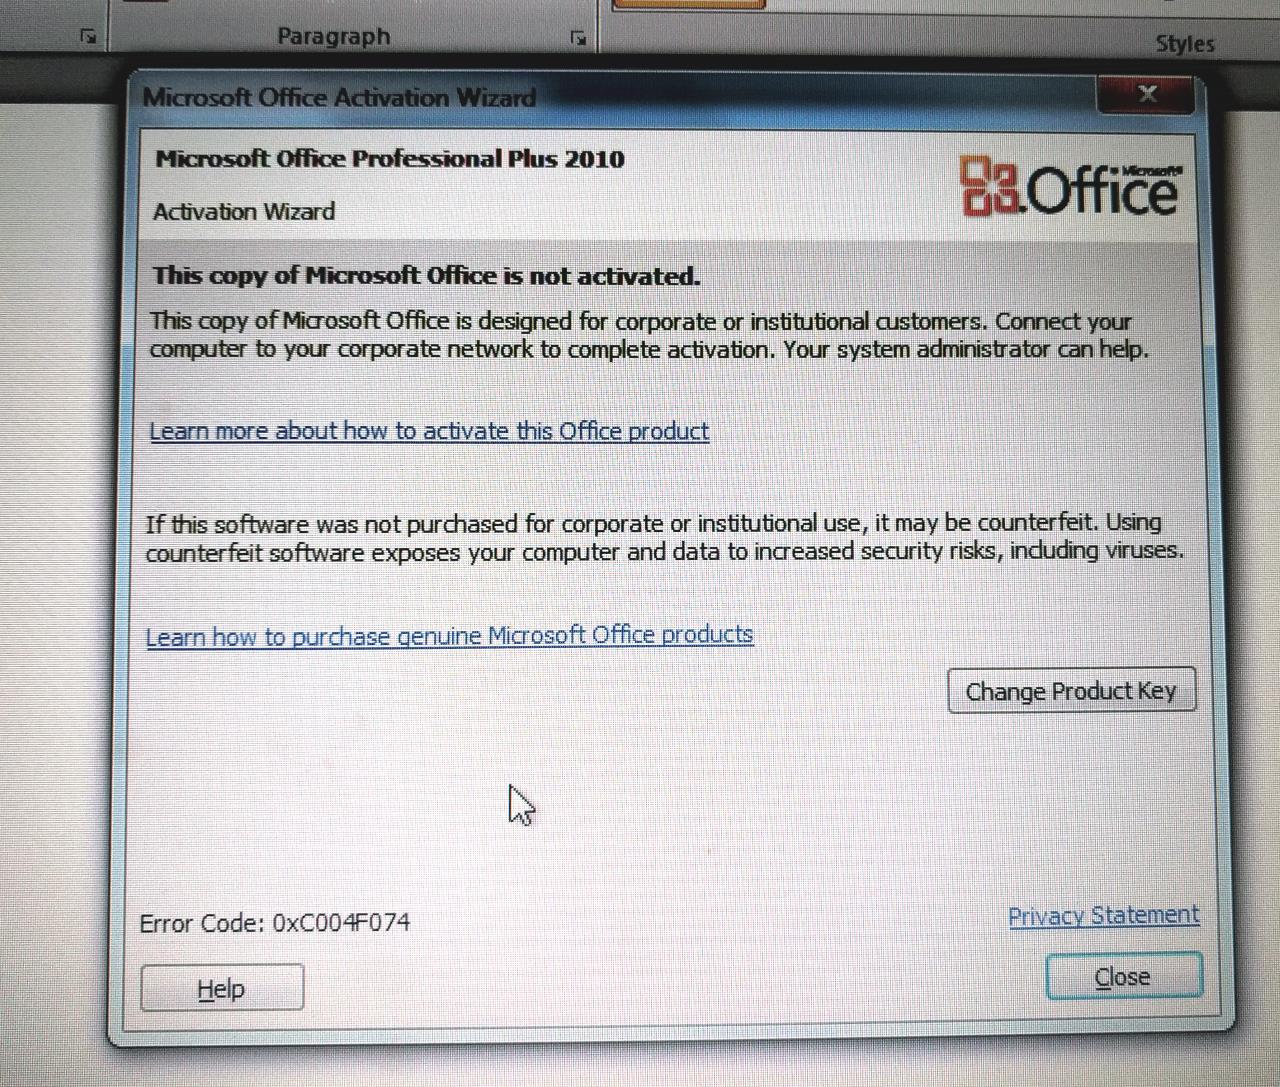 Can't activate Office either.